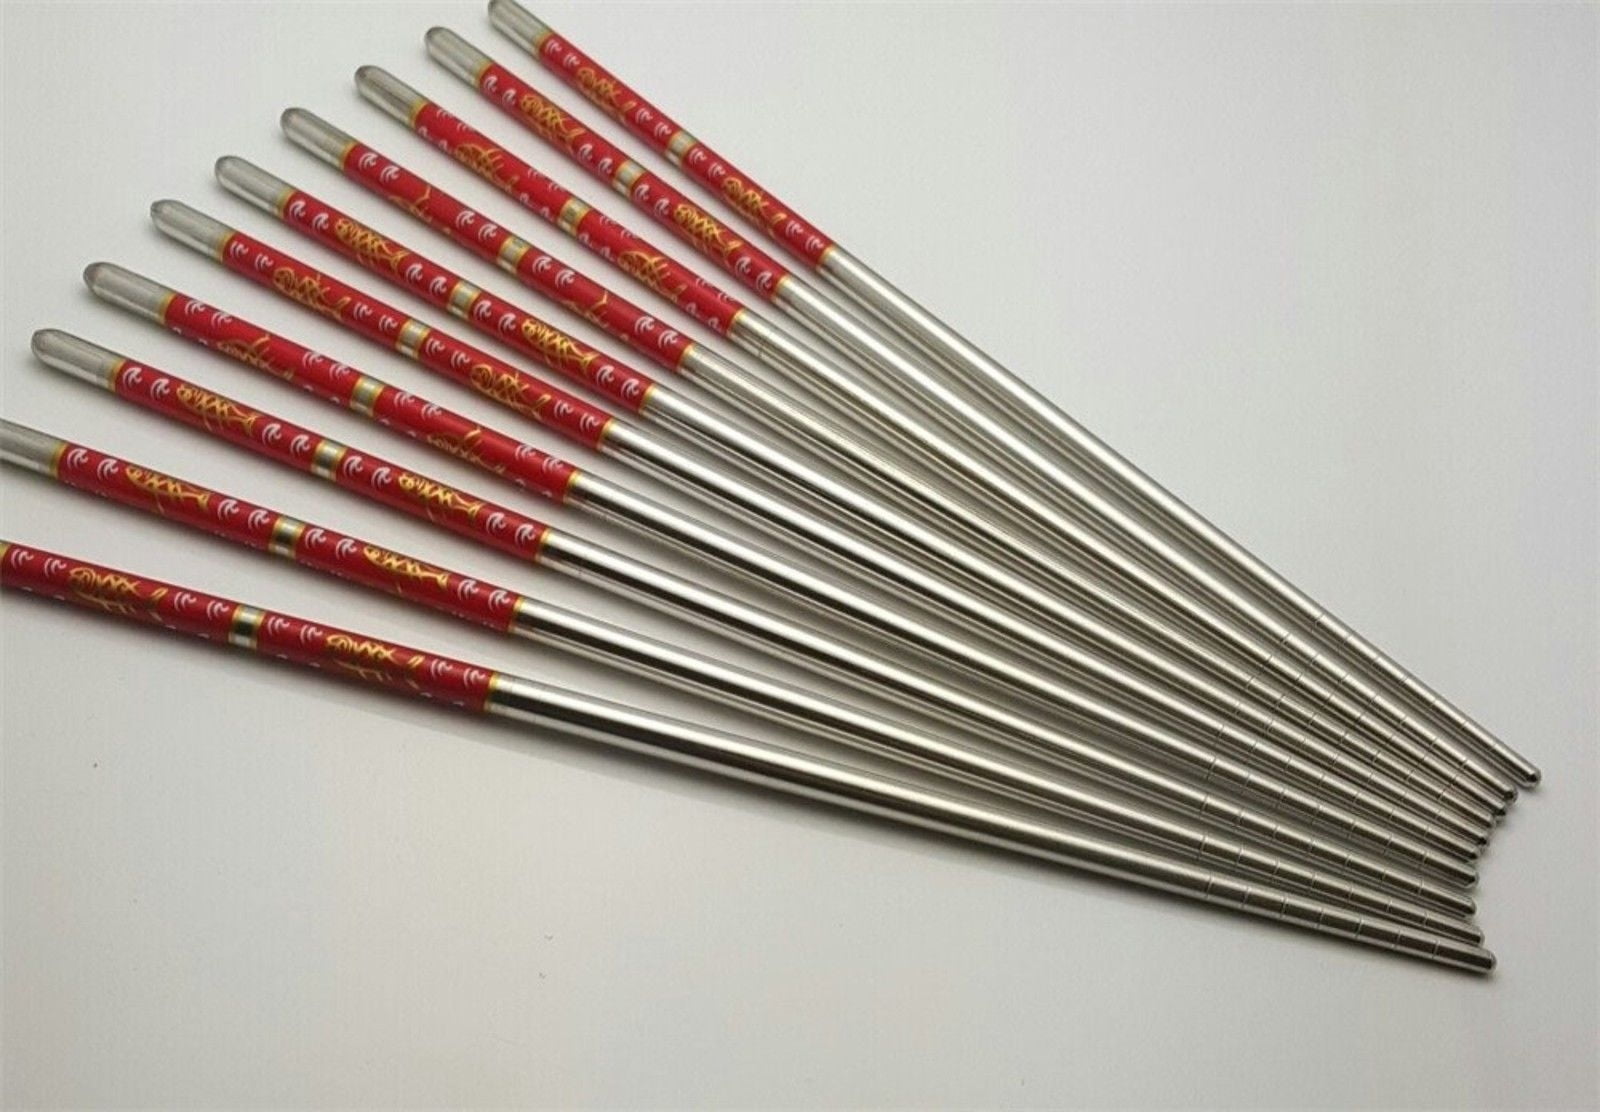 High Quality Fish Design Silver Stainless Steel Chopsticks 5 Pairs 10 Pcs 